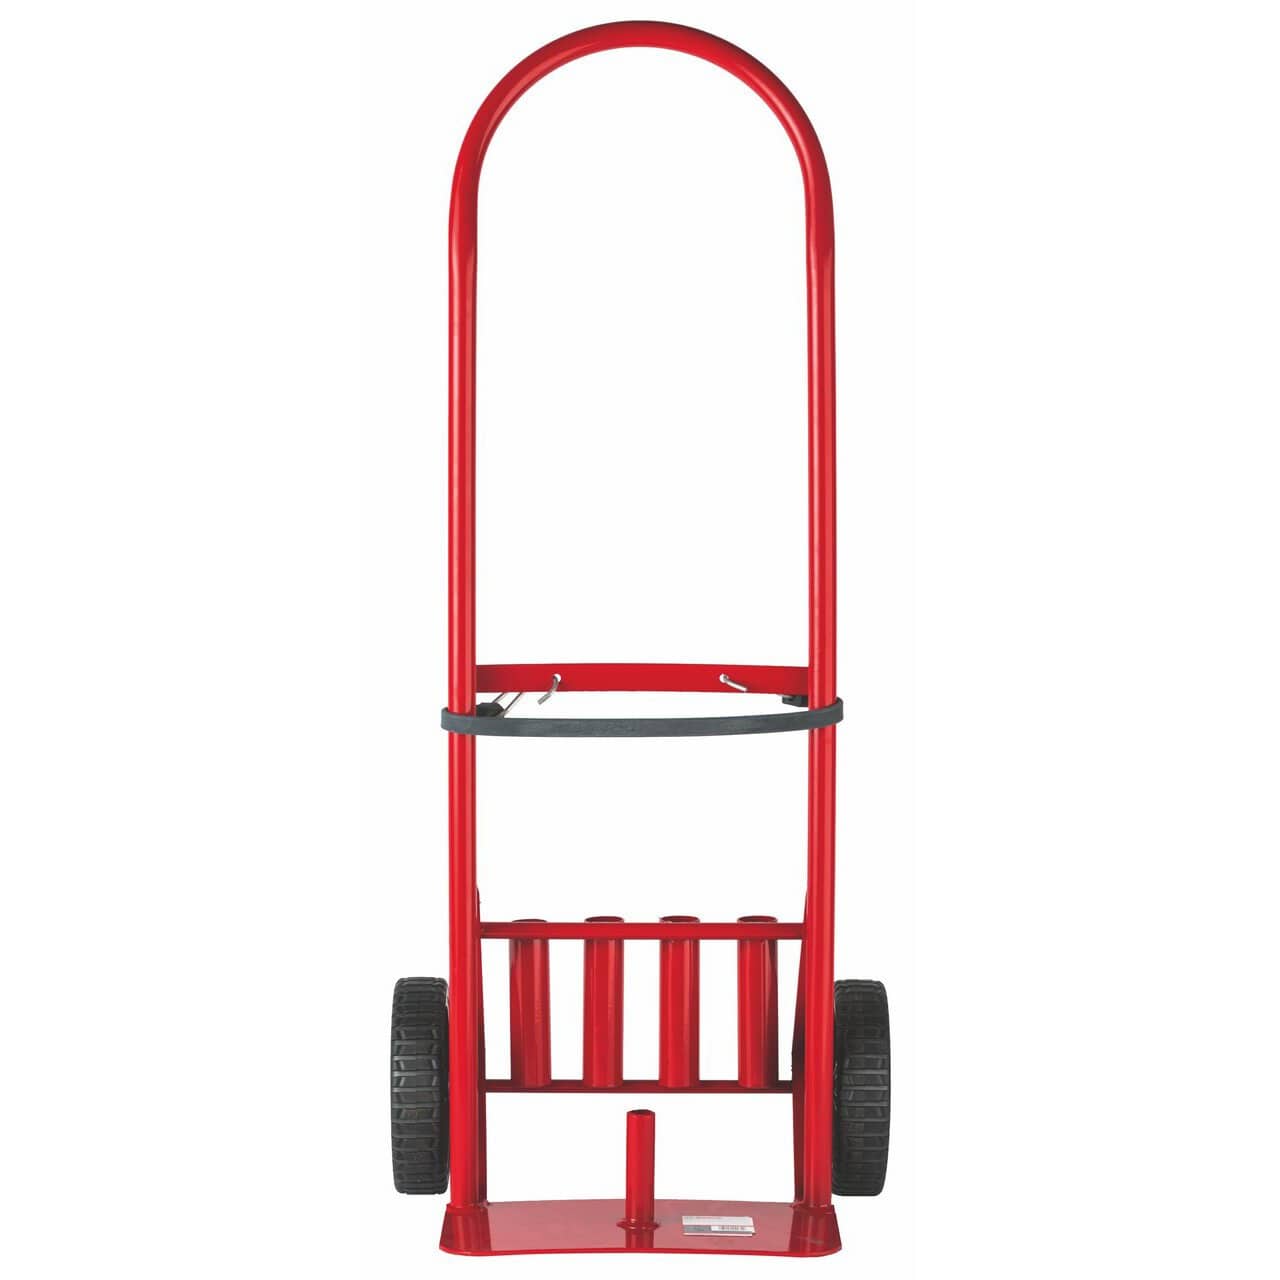 Optimize your demolition work with the Bosch Trolley for Demolition Breaker (GSH 27) at SupplyMaster.store in Ghana. Chuck Keys & Specialty Accessories Buy Tools hardware Building materials